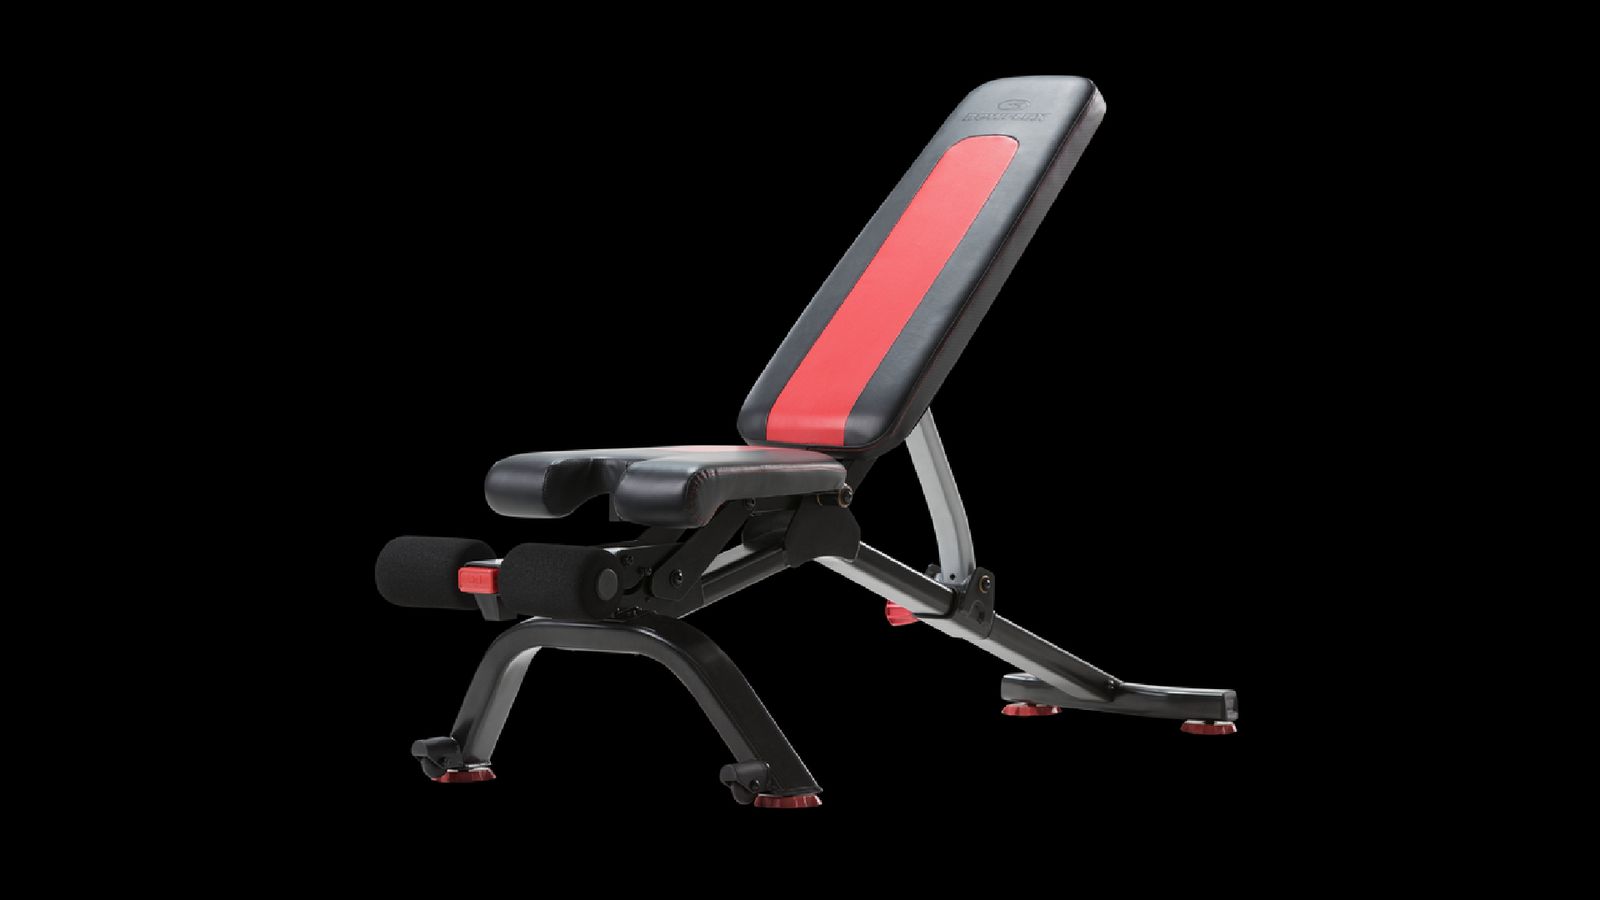 Bowflex 5.1s product image of a black and red bench.